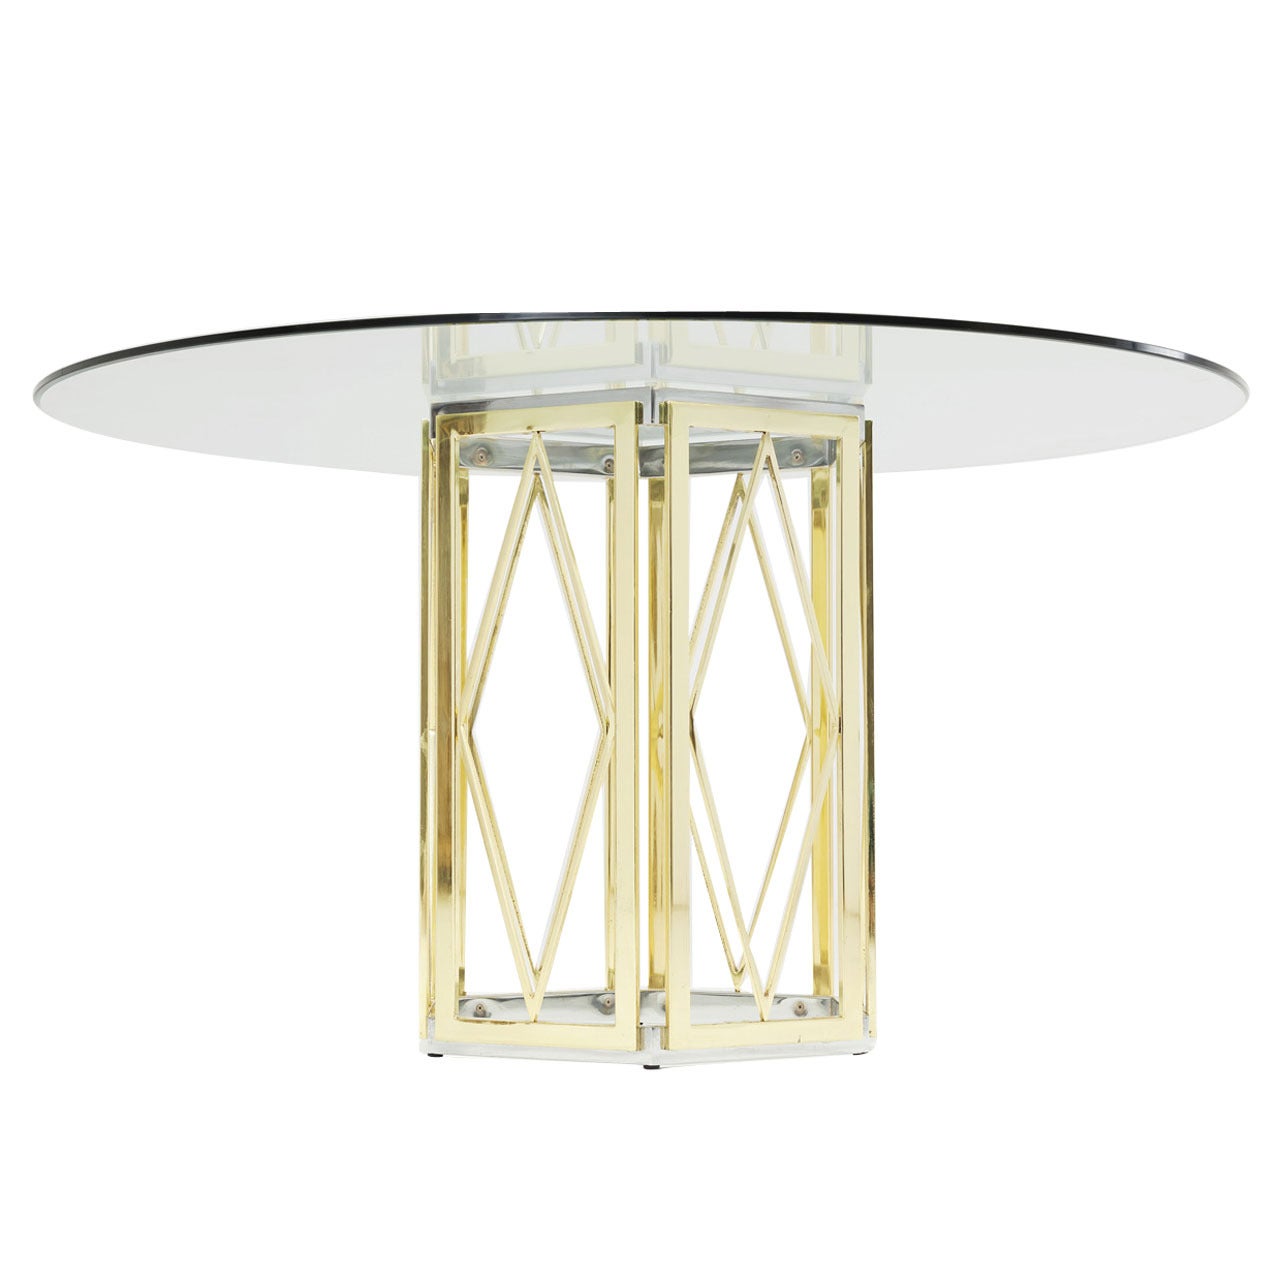 Sculptural Italian Brass And Chrome Pedestal Table With Round Glass Top